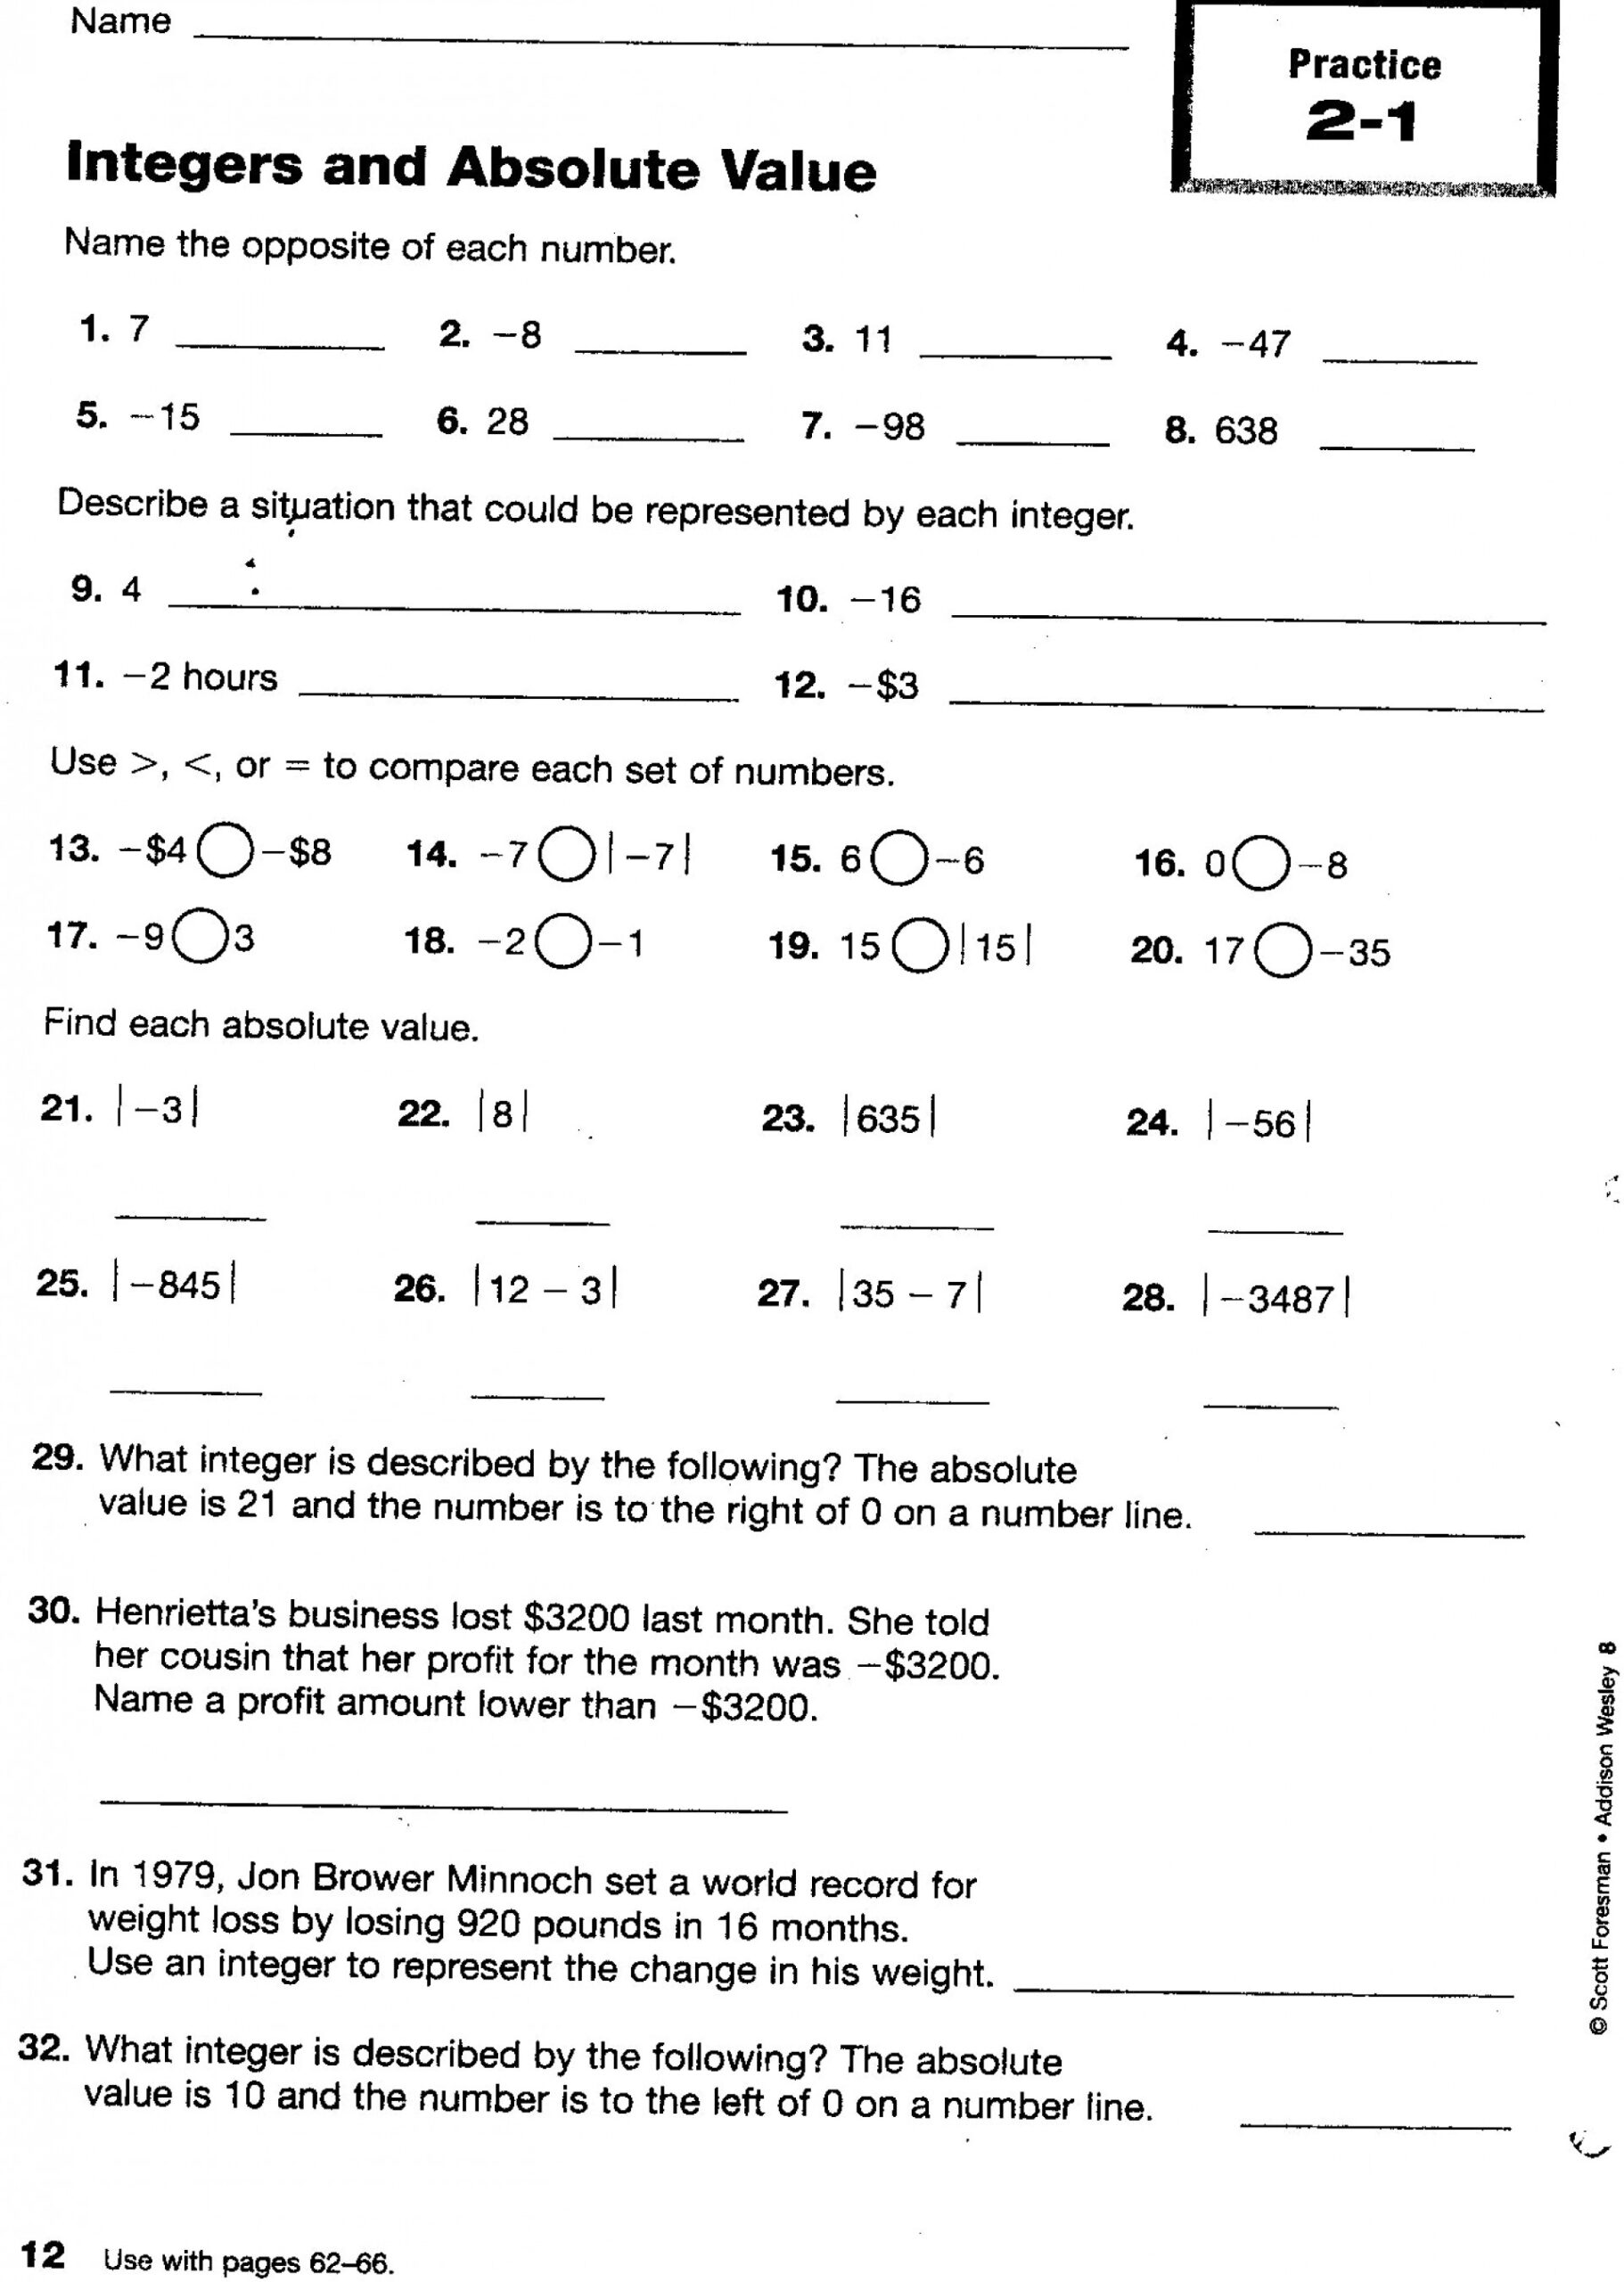 ged math practice test questions